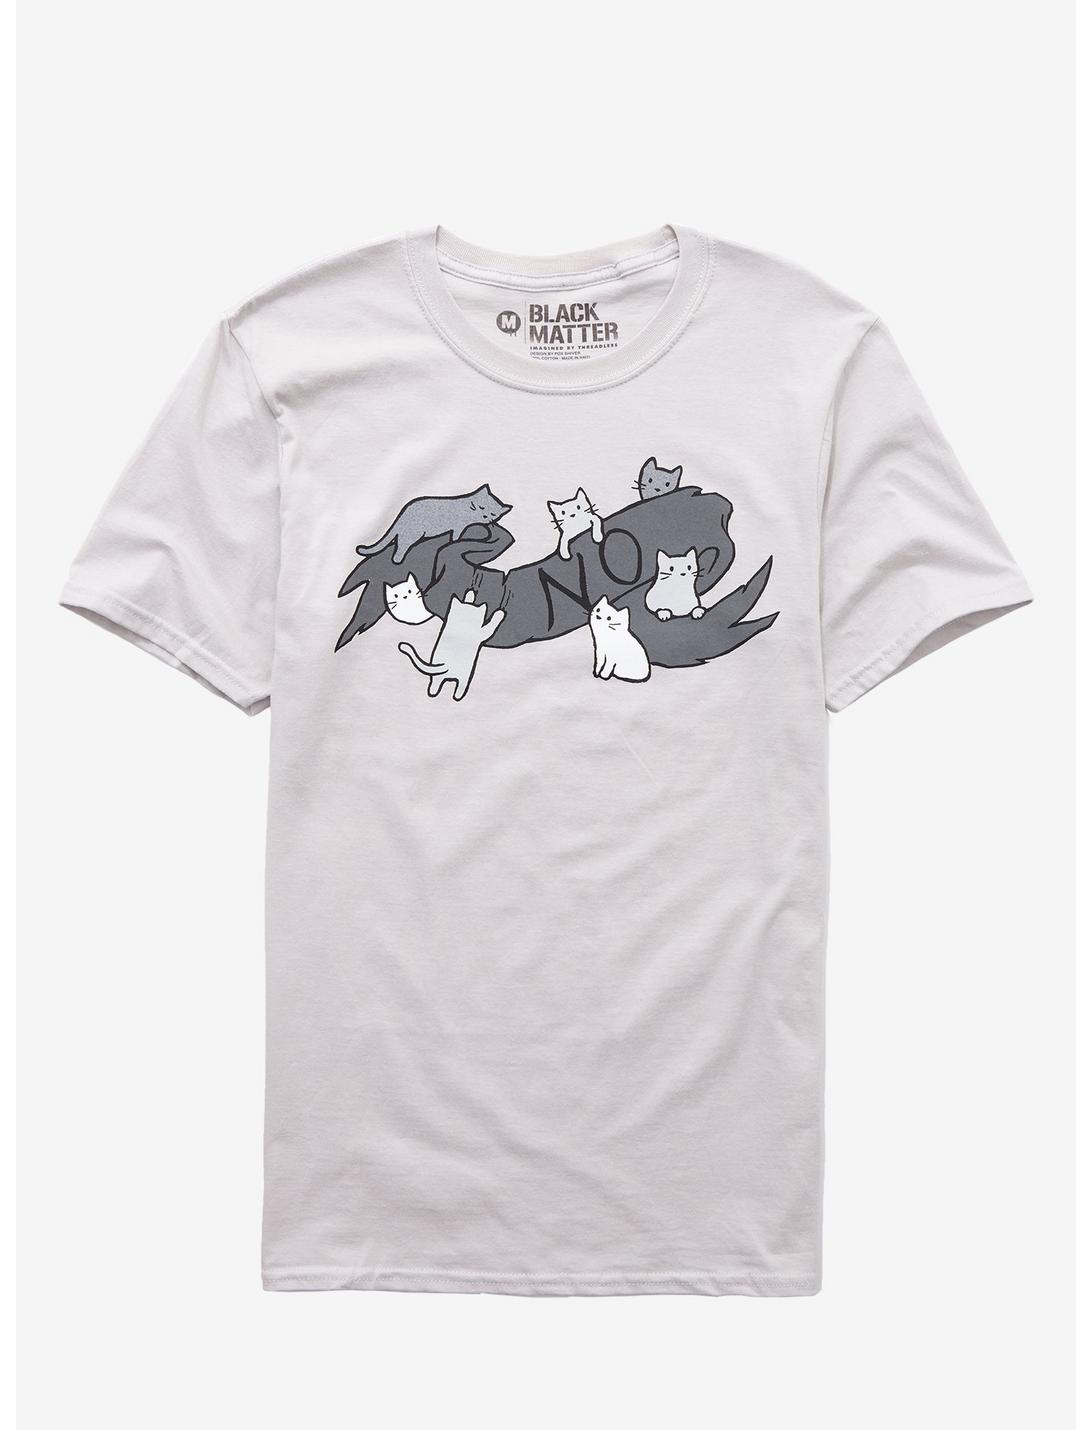 No Banner Cats T-Shirt By Fox Shiver, MULTI, hi-res